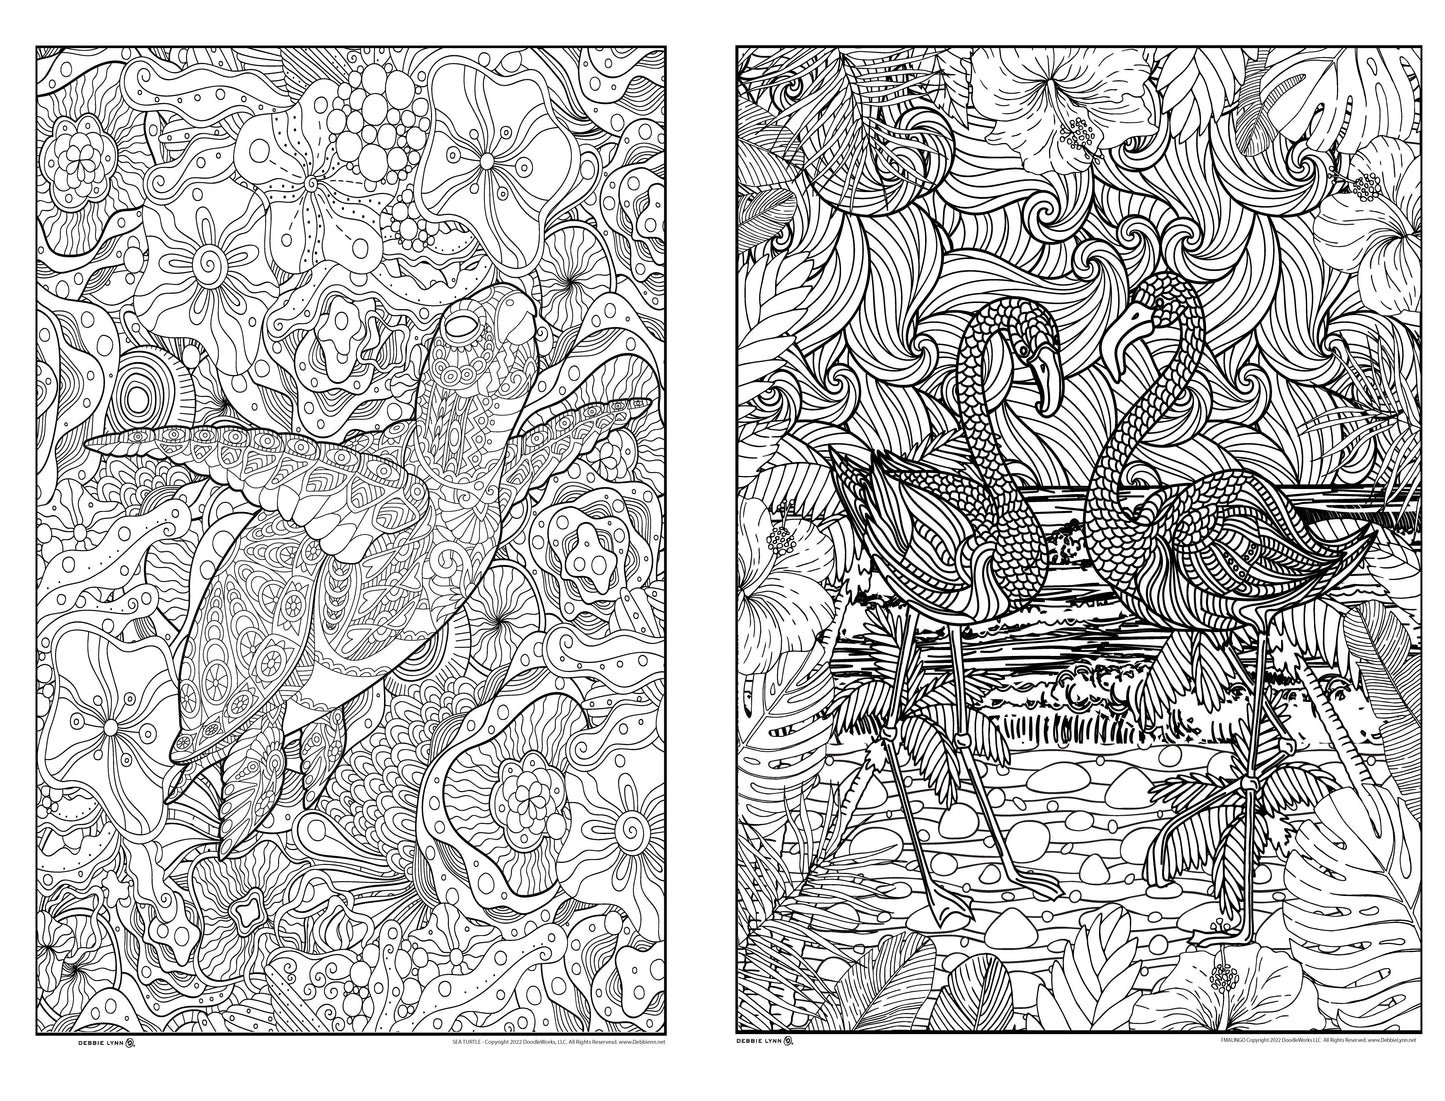 Turtle & Flamingo 2in1 Combo Giant Coloring Poster